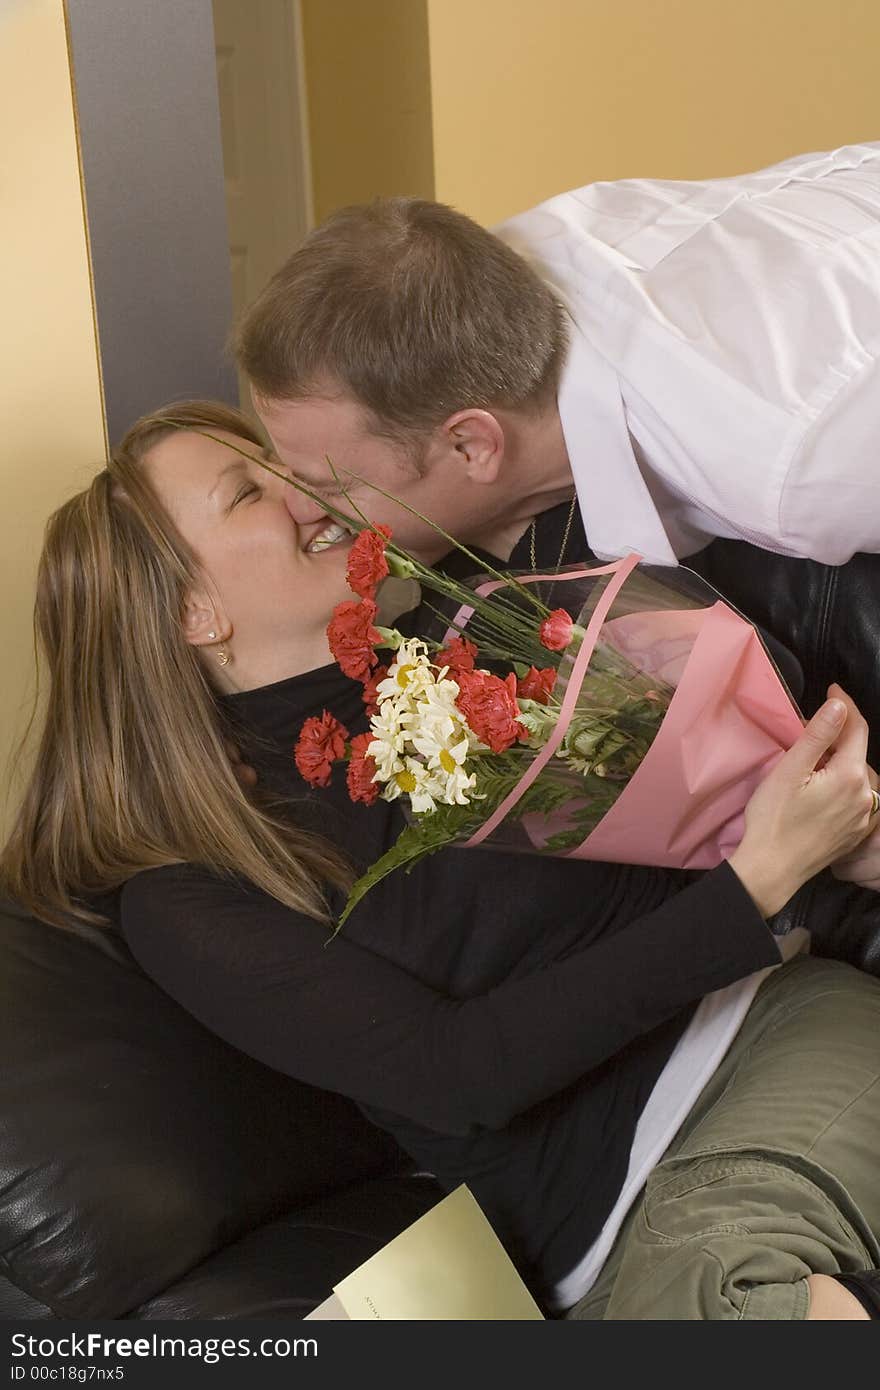 Man offering flower to woman sitting on couch. Man offering flower to woman sitting on couch